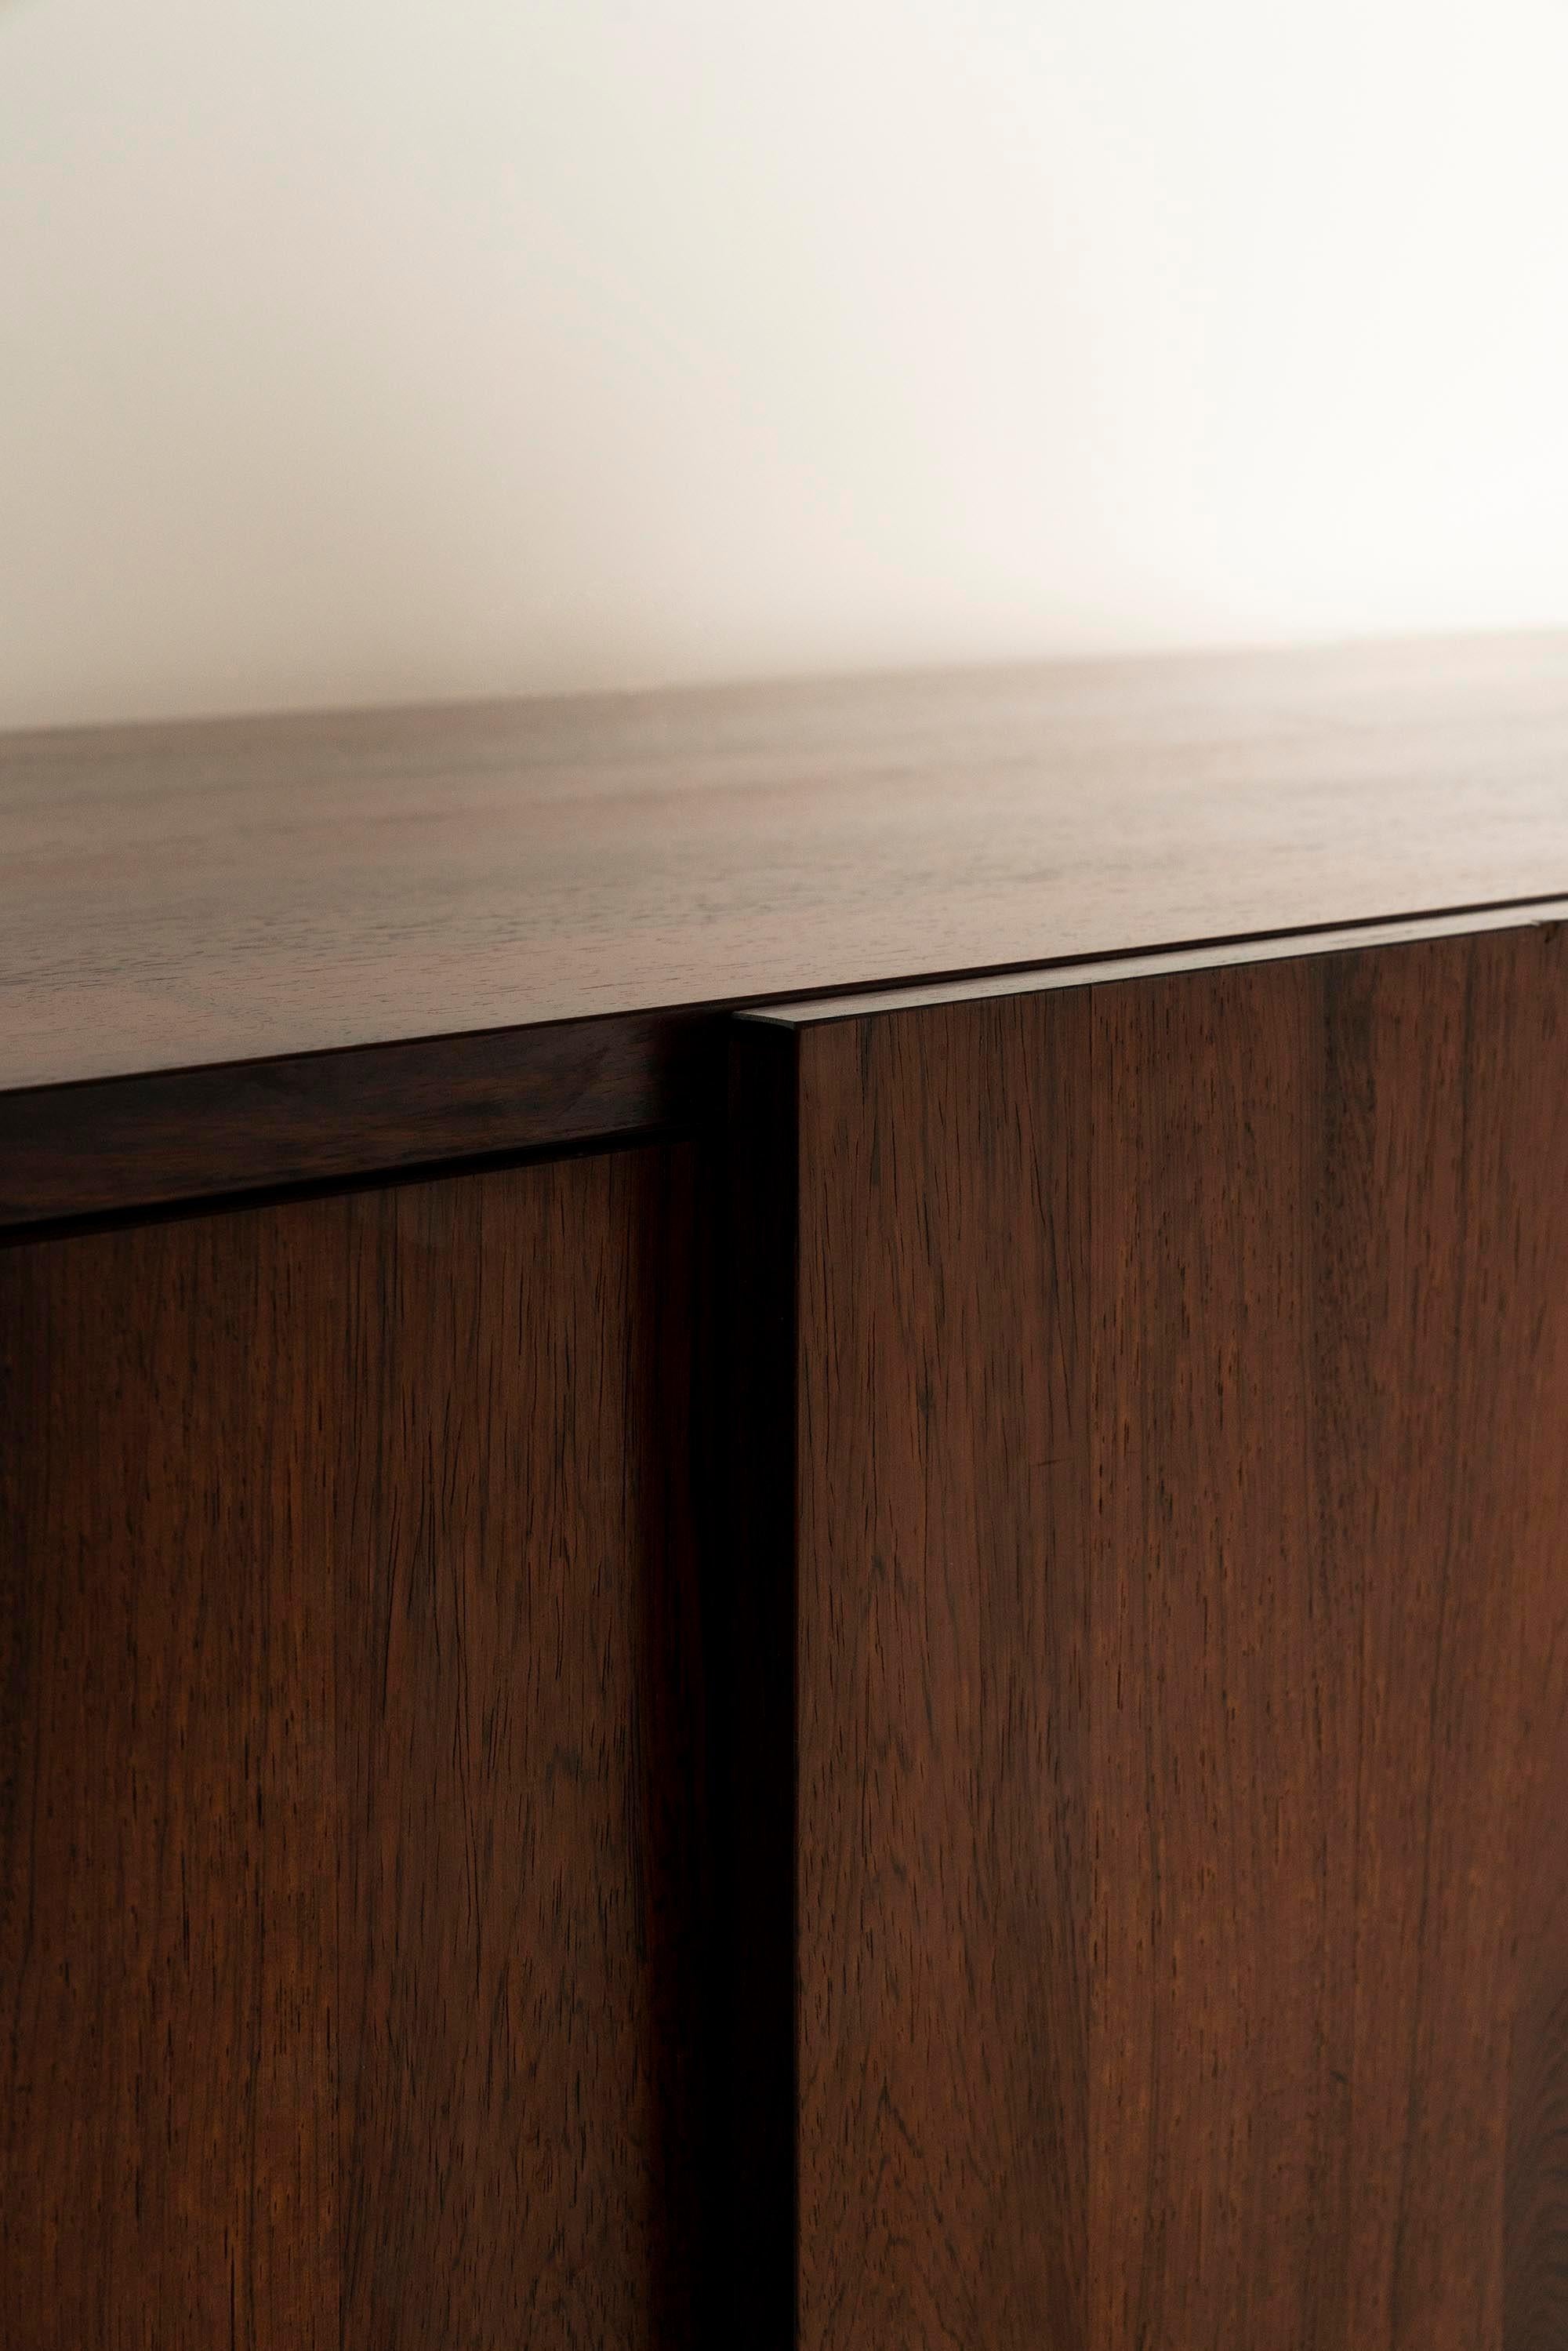 Late 20th Century Floating Wall-Mounted Sideboard in Rosewood by Ib Kofod-Larsen, Denmark 1970s